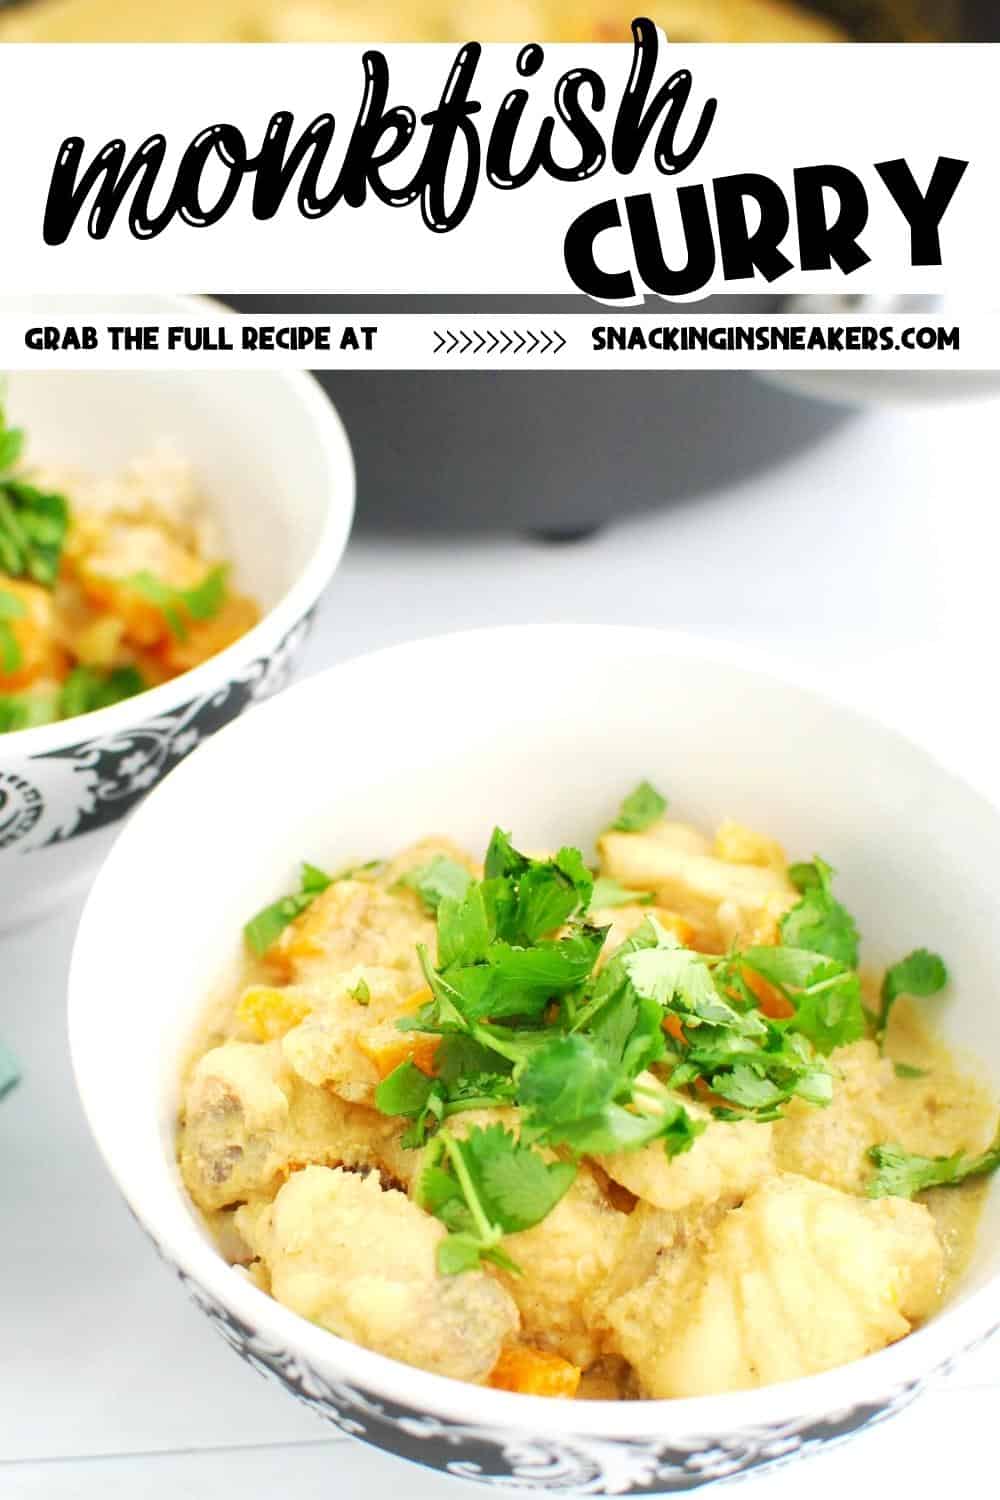 A bowl of monkfish curry with a text overlay for Pinterest.